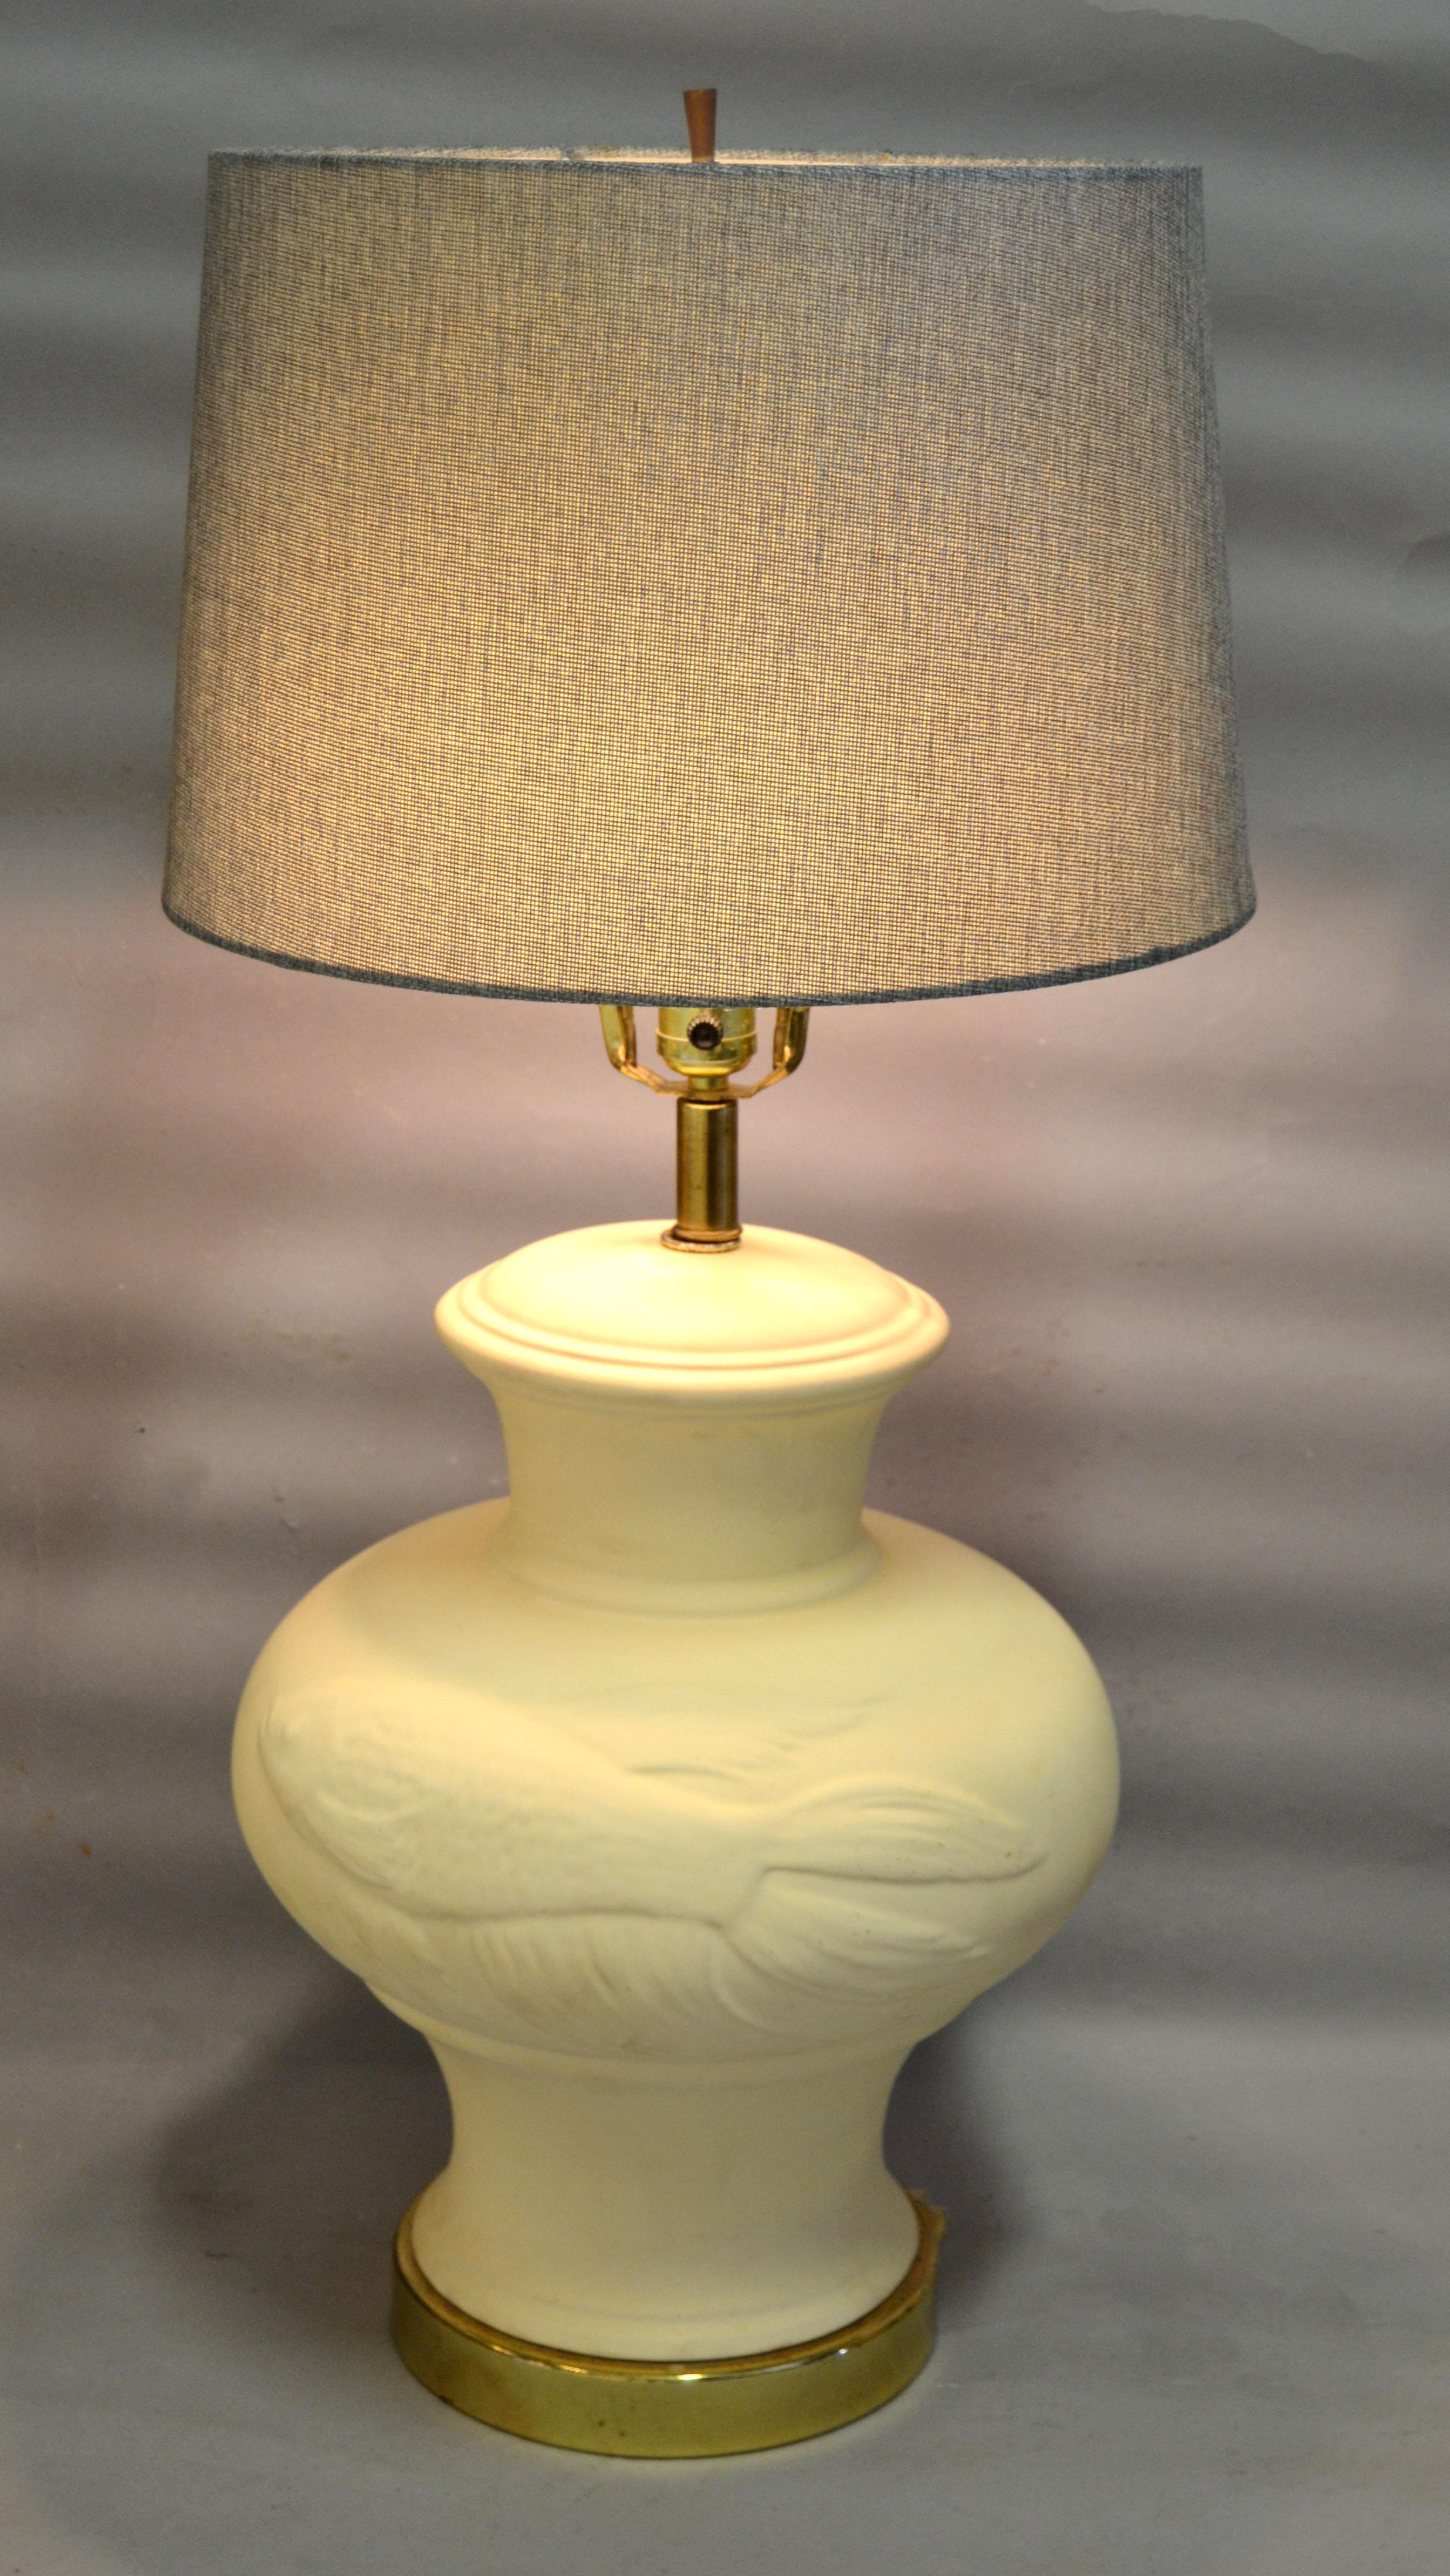 1970 Chinese Inspired Beige Ceramic & Brass Table Lamps with Koi Fish Image Pair In Good Condition For Sale In Miami, FL